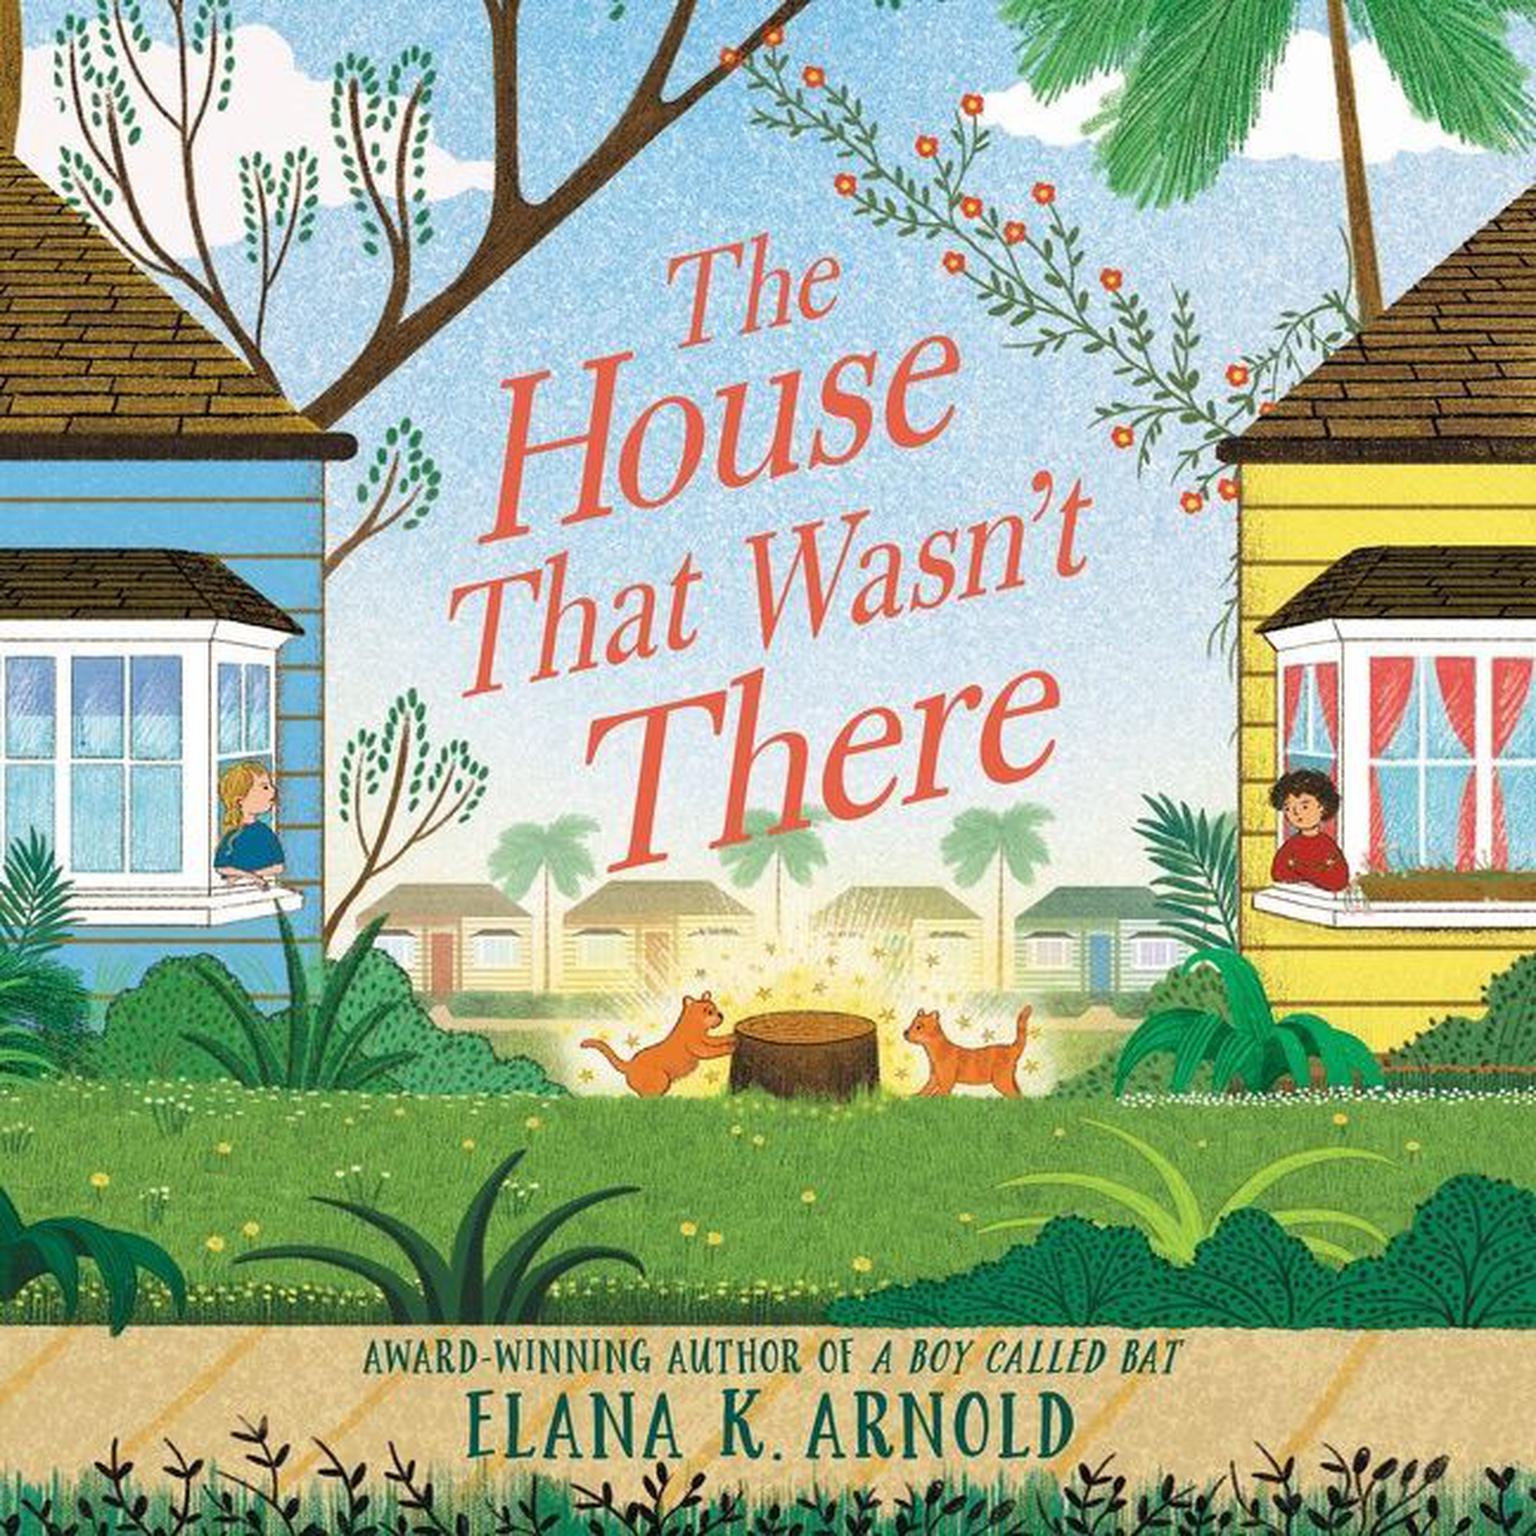 The House That Wasnt There Audiobook, by Elana K. Arnold